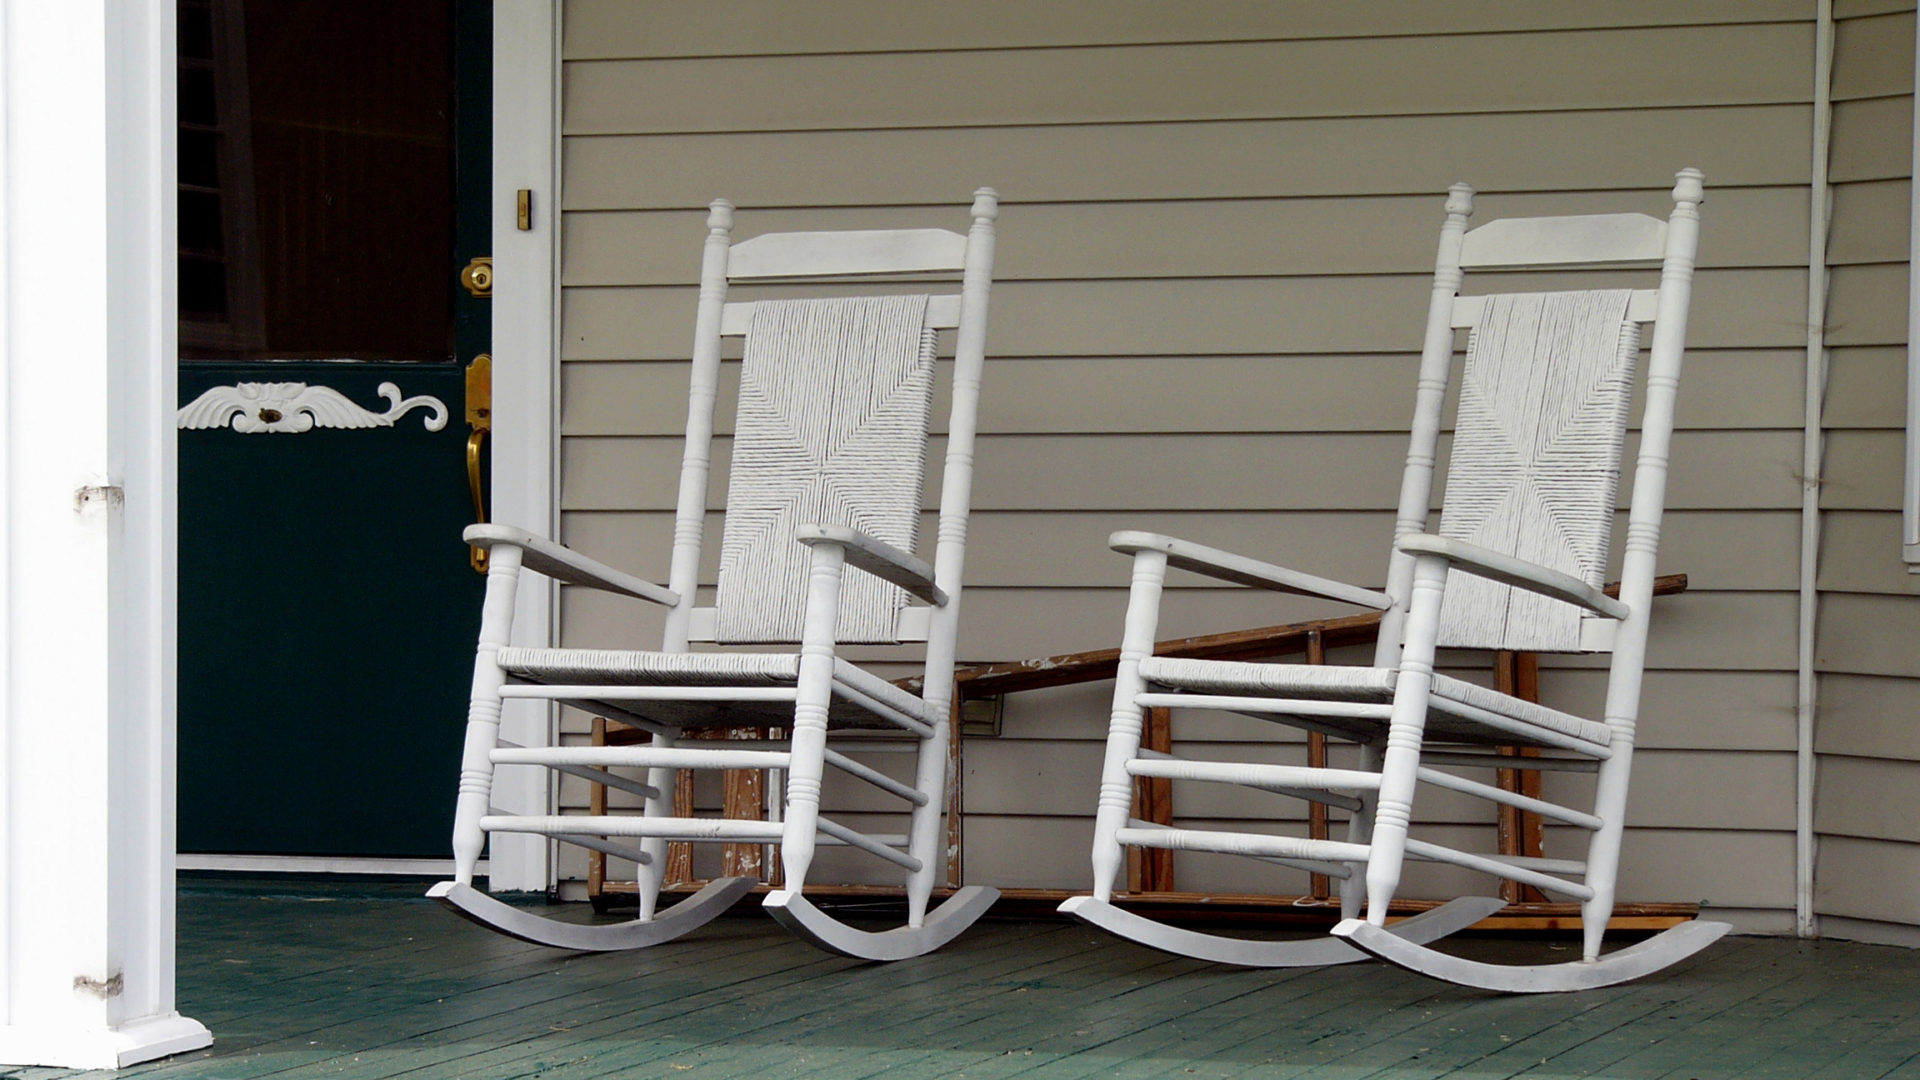 Retiree Rebels: Ditch the Rocking Chair